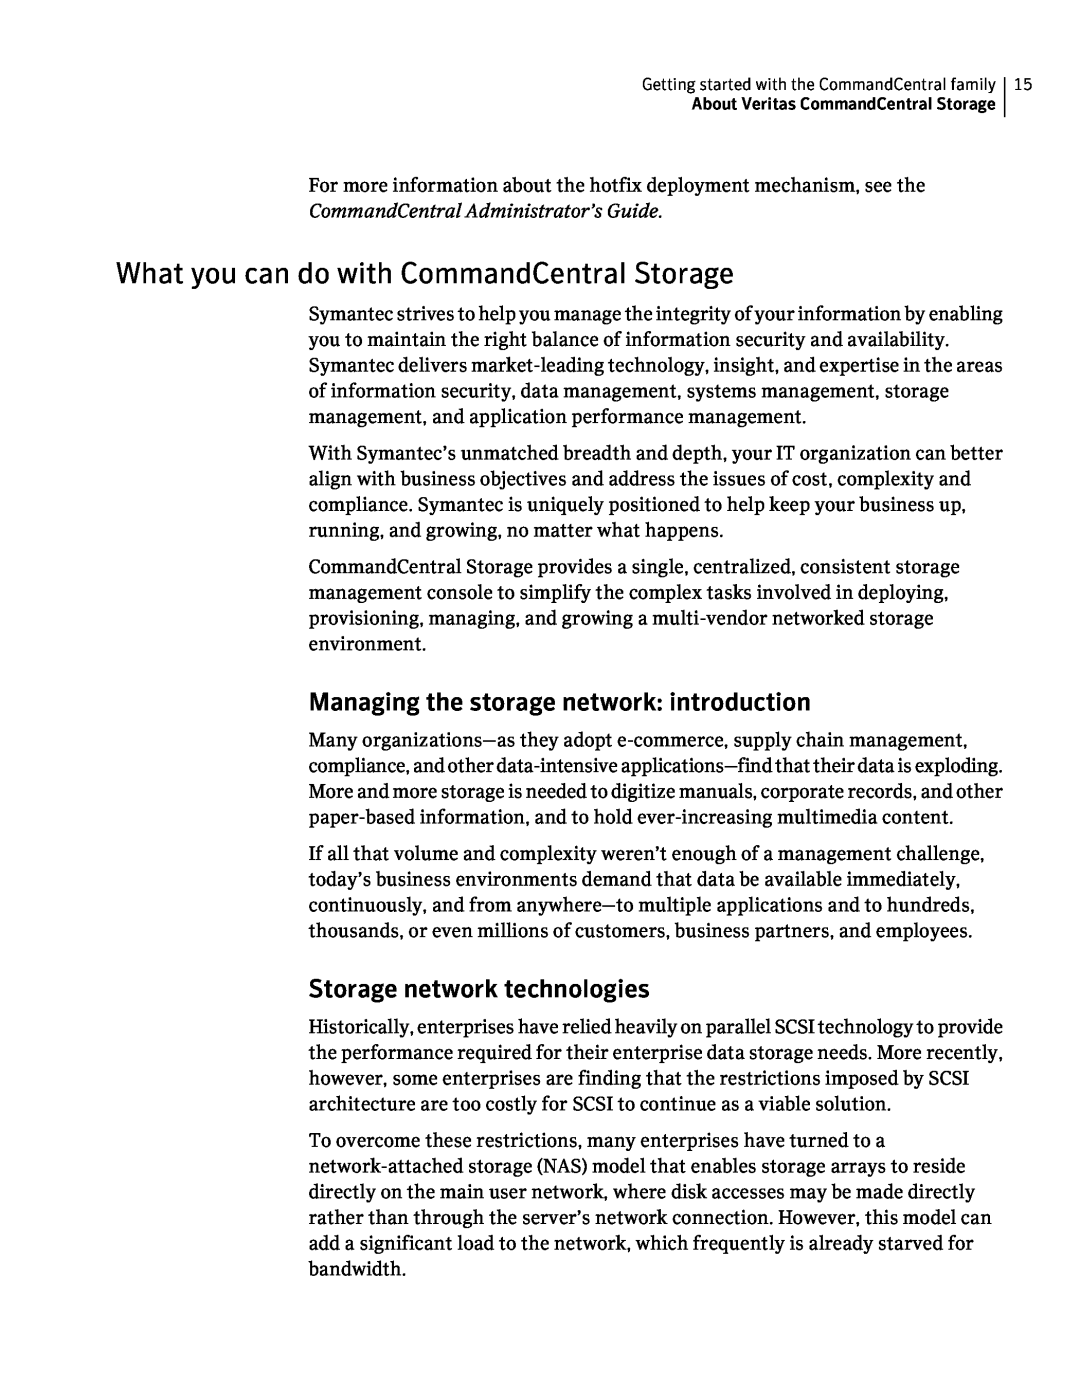 Symantec 5.1 manual What you can do with CommandCentral Storage, Managing the storage network introduction 